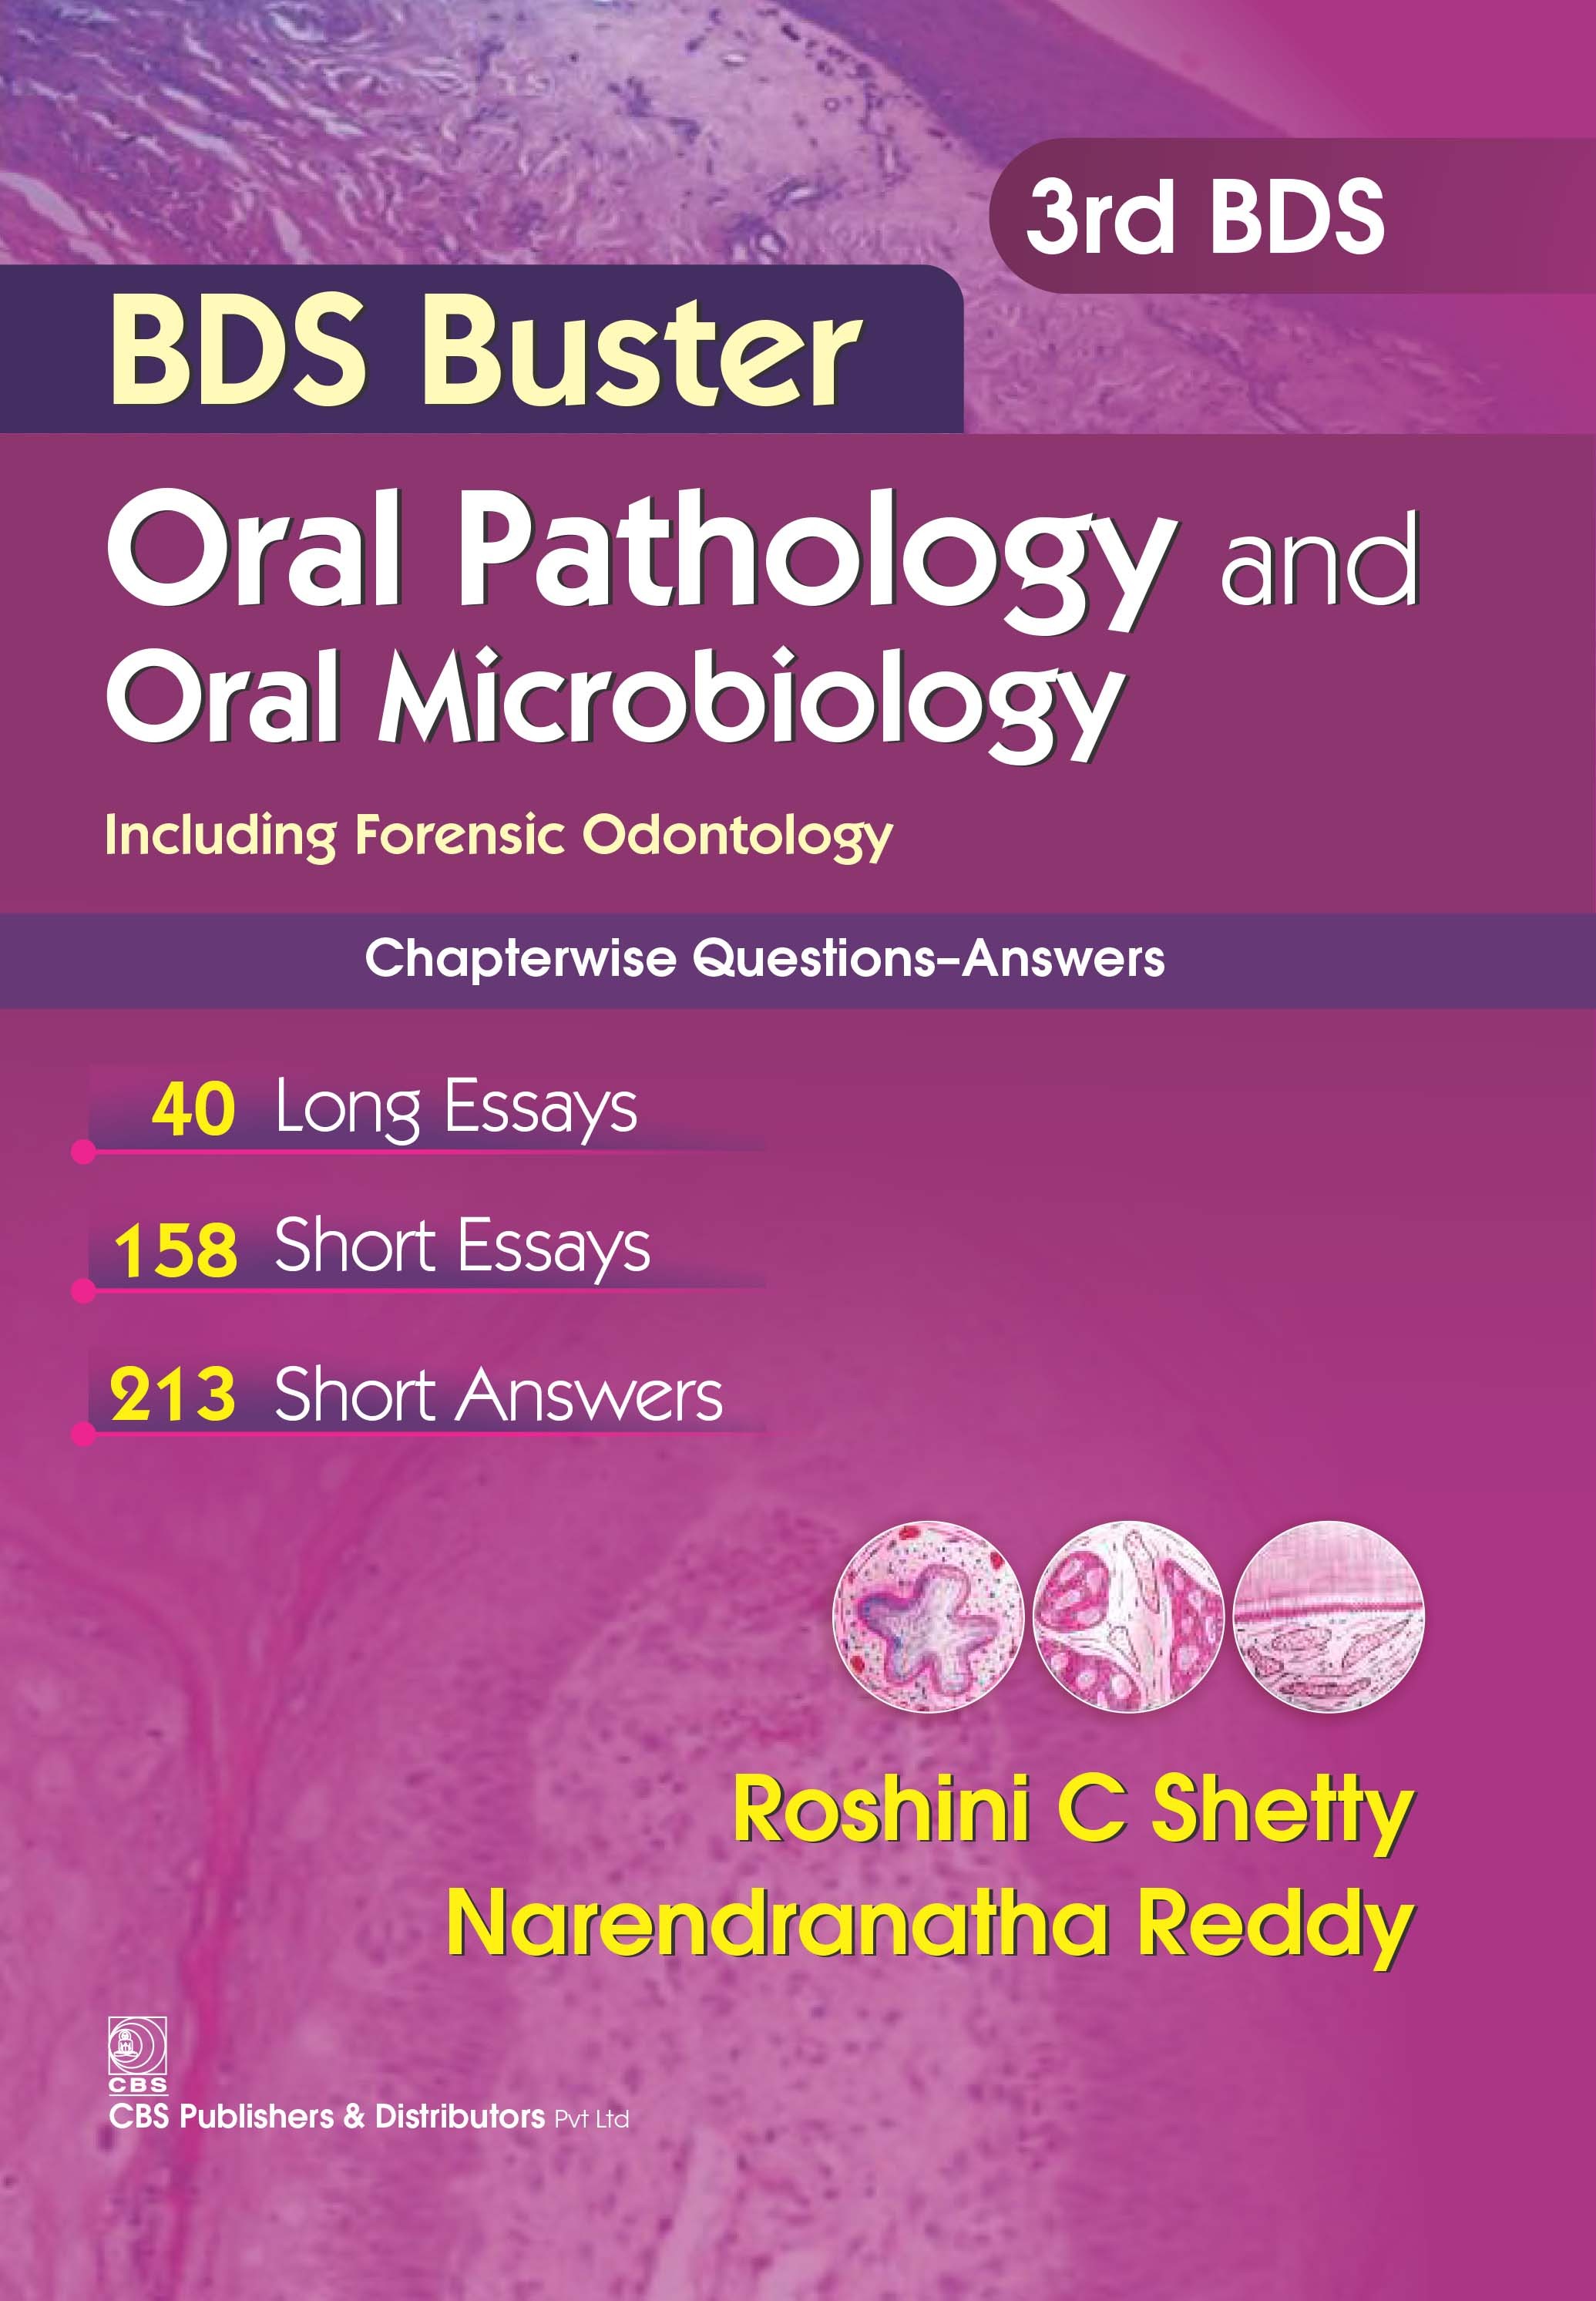 Bds Buster Oral Pathology And Oral Microbiology(Including Forensic Odontology ) 3Rd Bds( Pb 2016)